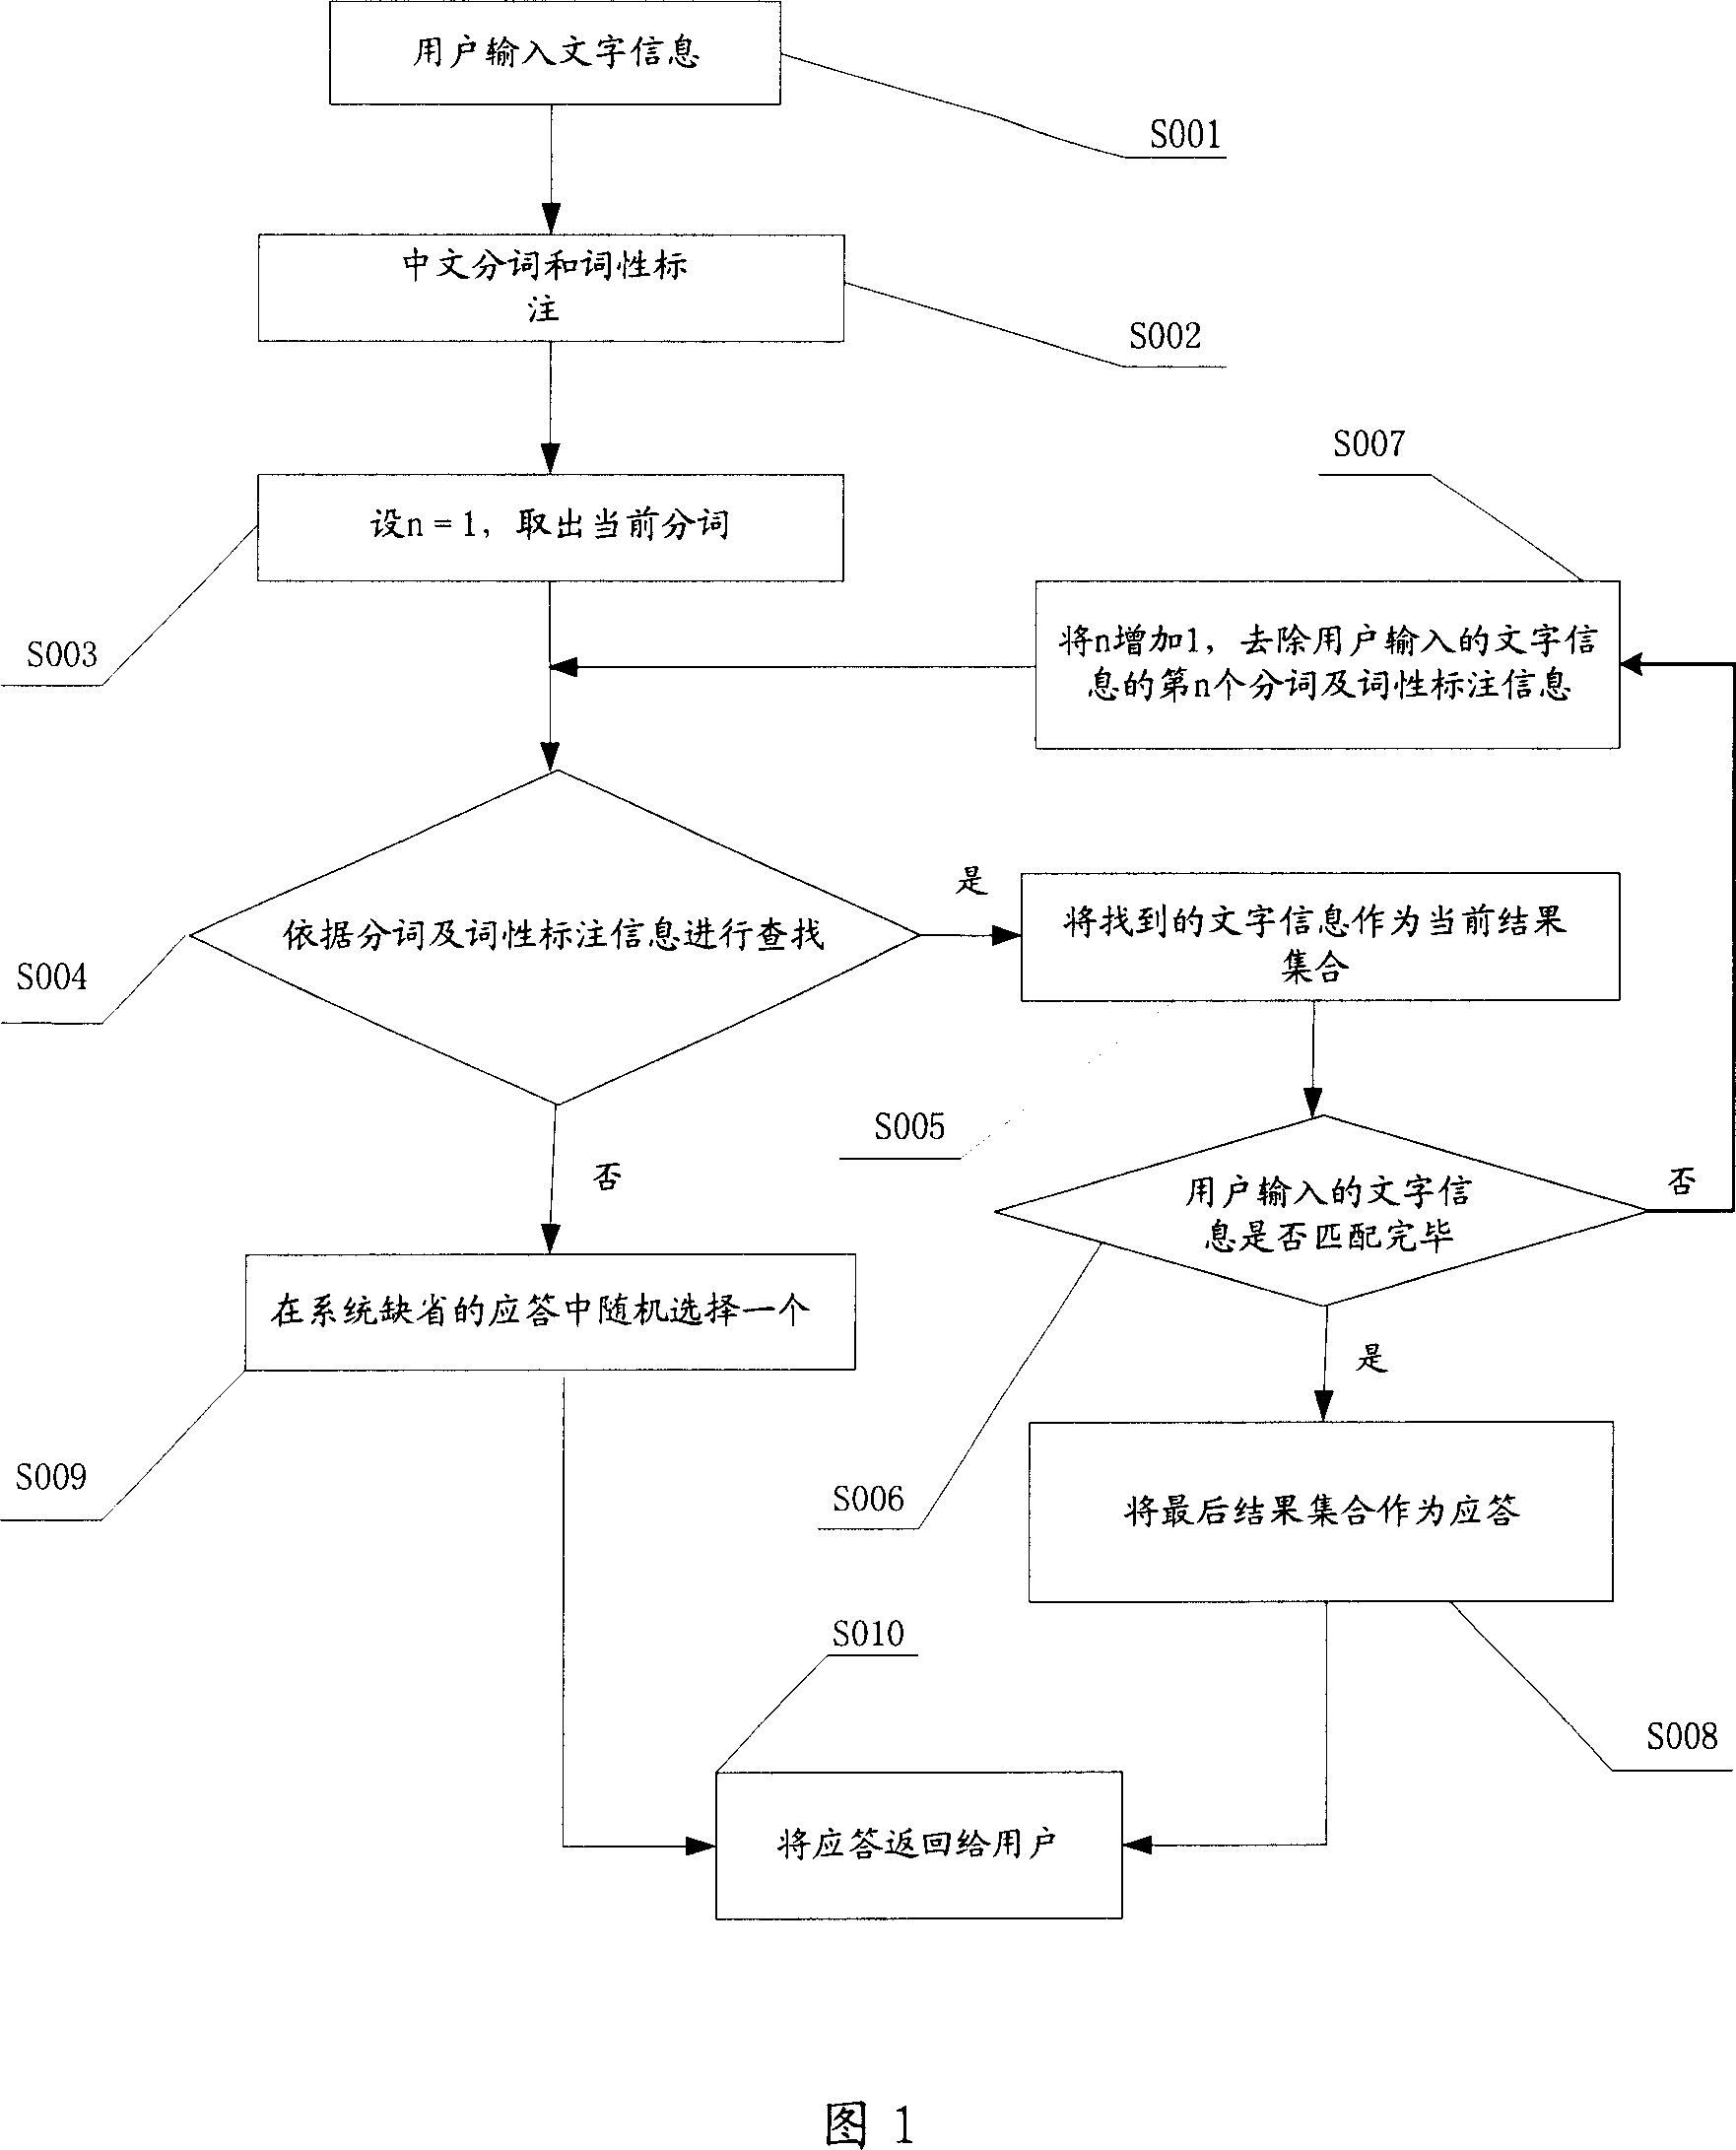 Automatic question-answering method and system